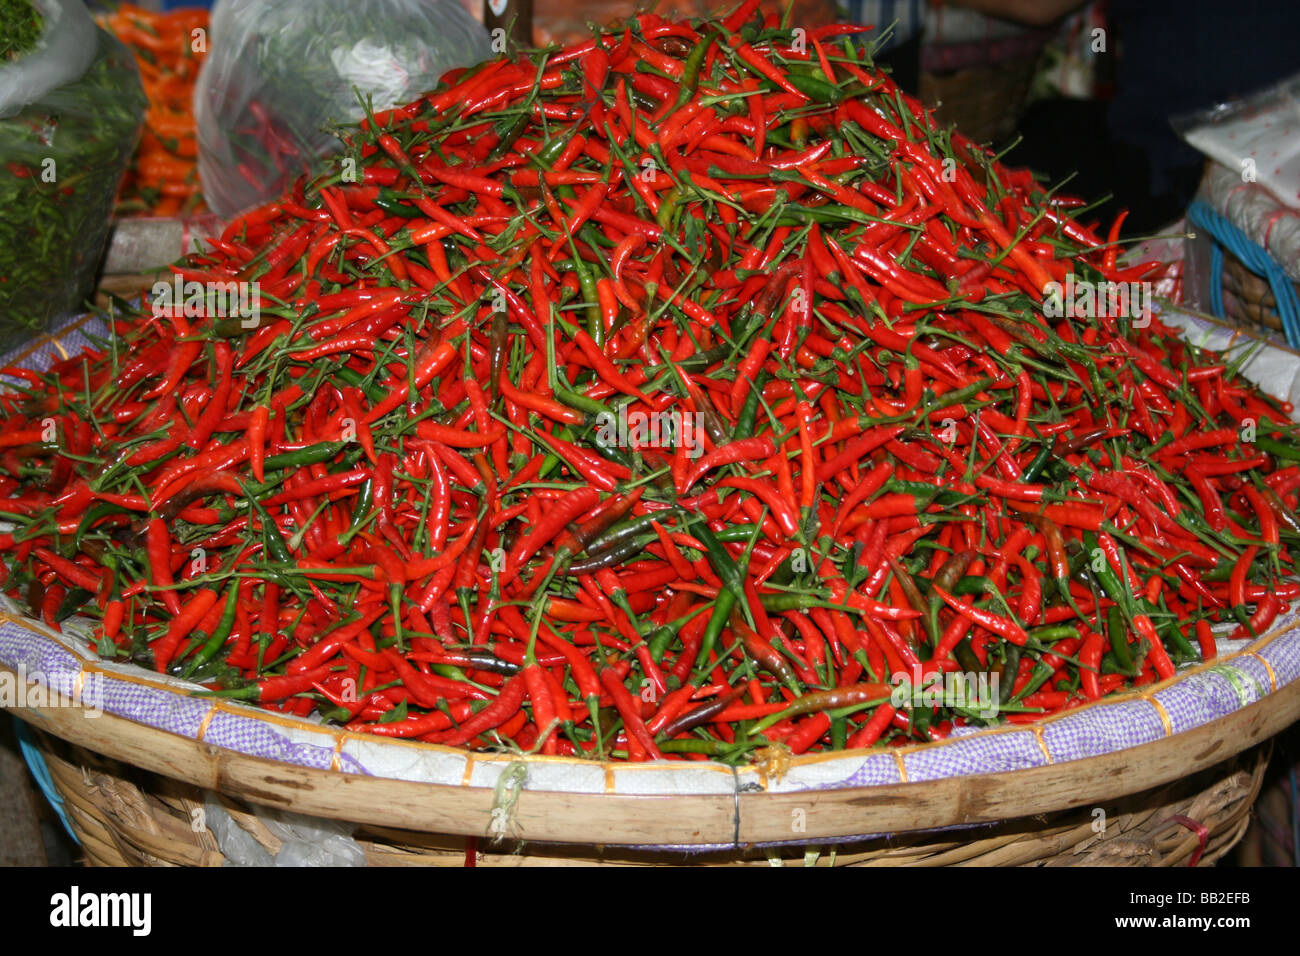 A large pile of red a green chillies at a market in Bankok Stock Photo